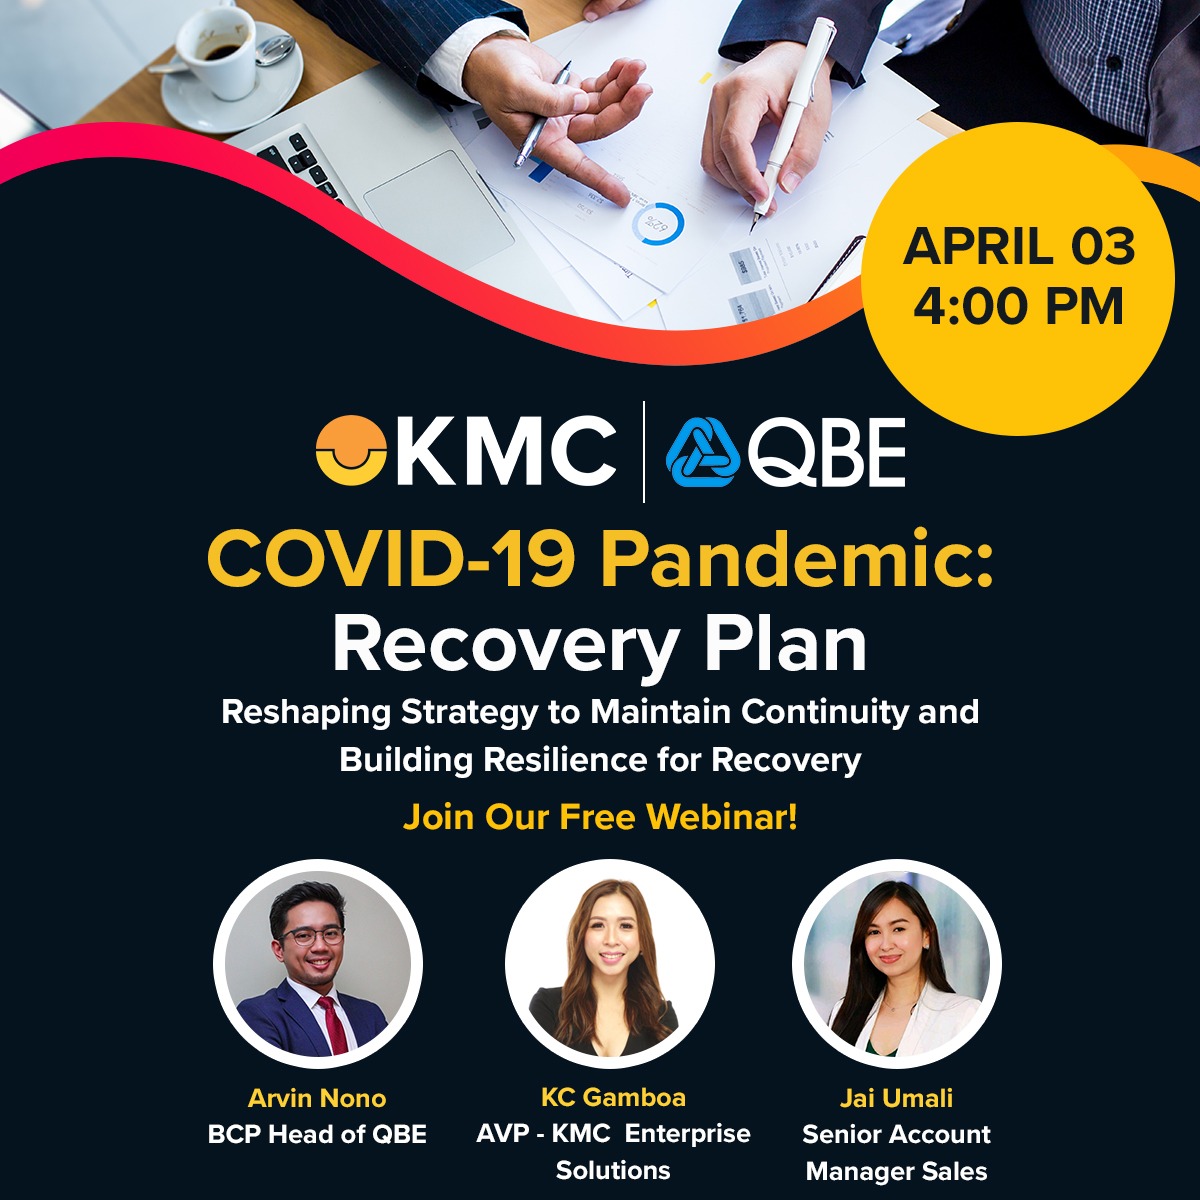 COVID-19 Pandemic: Recovery Plan with Arvin Nono